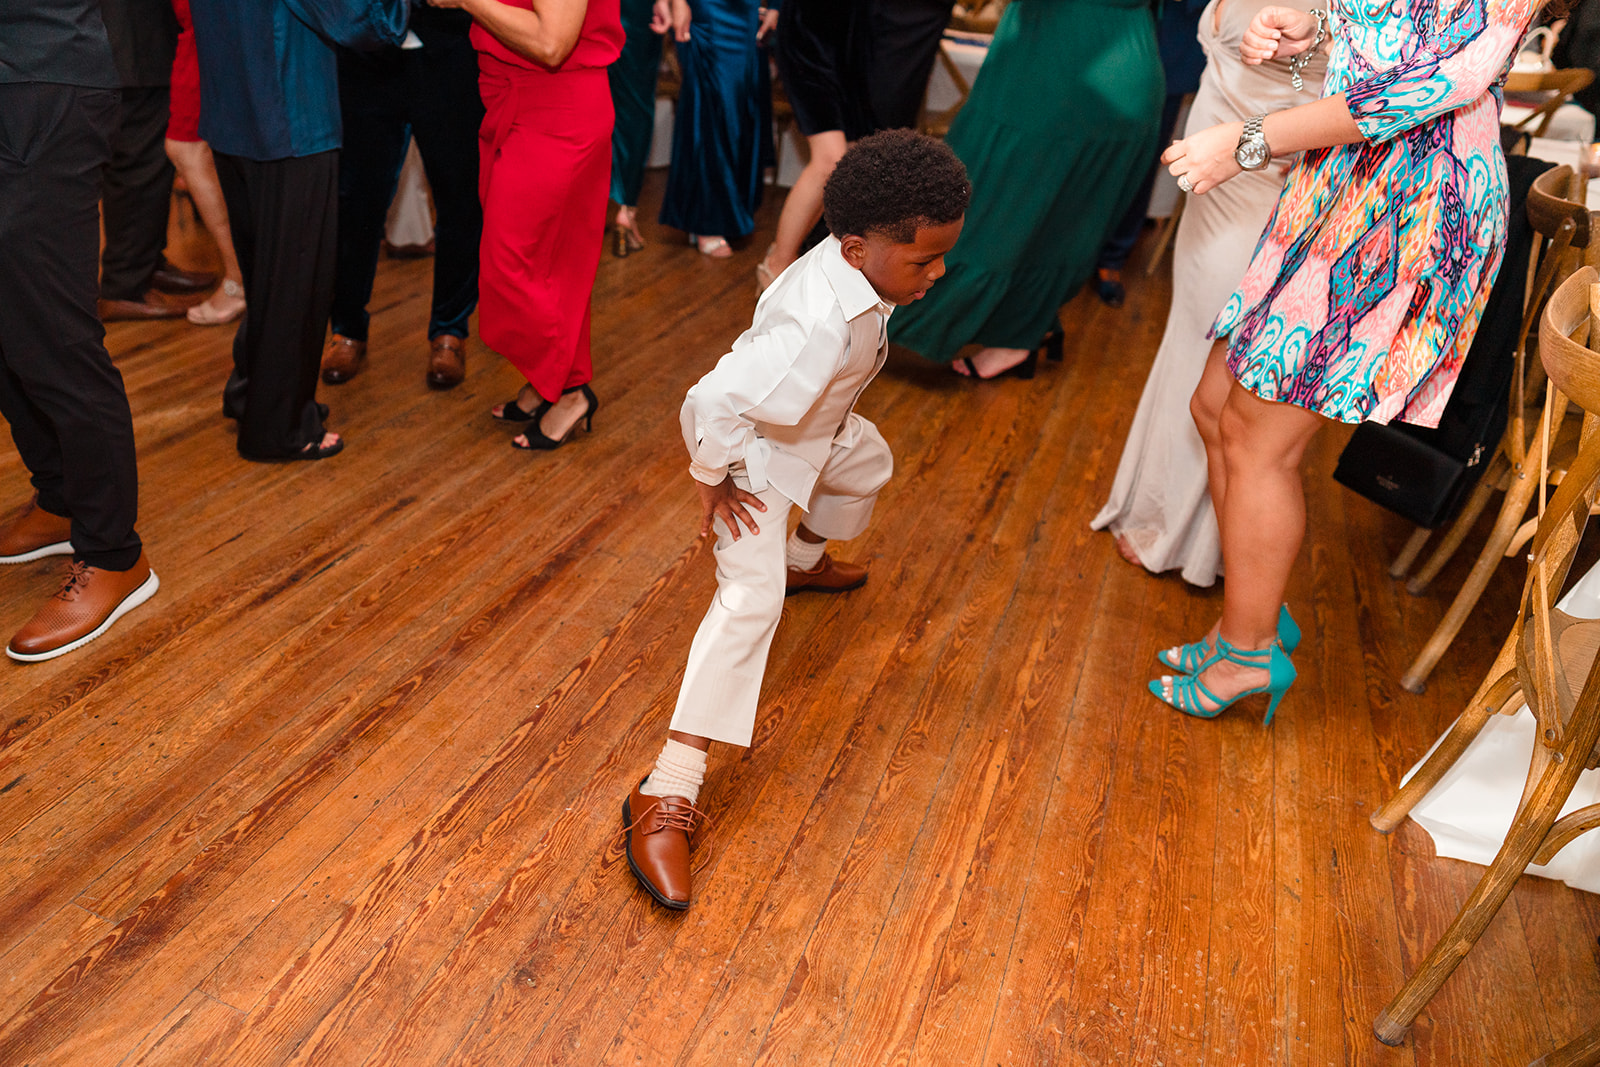 Young guest showcasing impressive dance moves on the reception dance floor at Venue 1902.